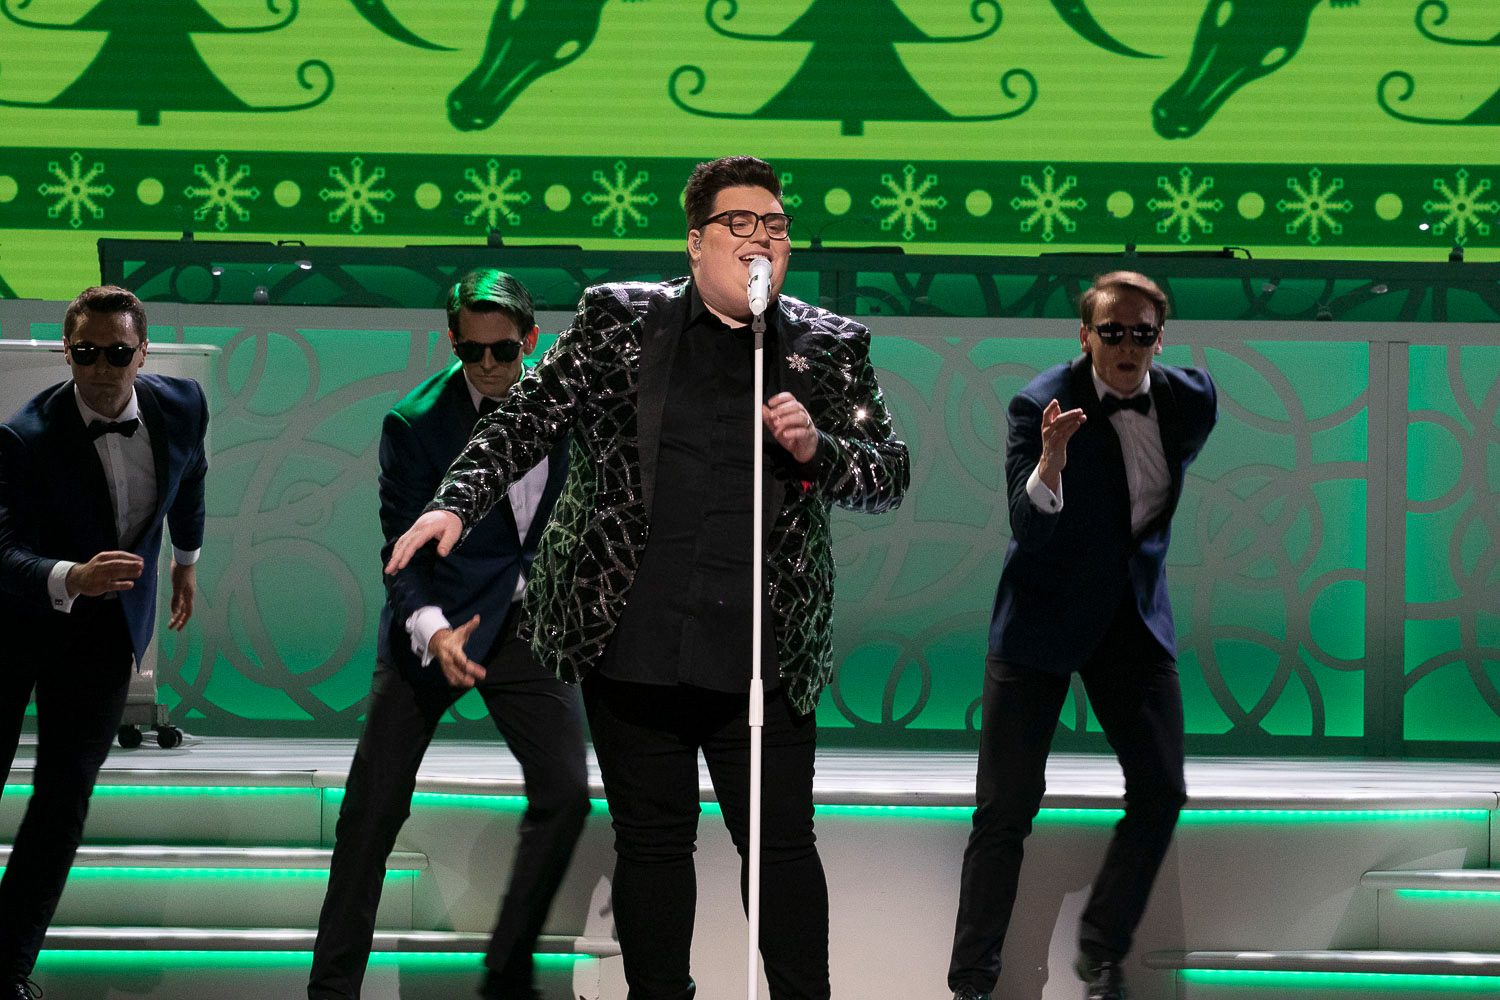 Jordan Smith performs holiday favorite “You’re a Mean One Mr. Grinch.”